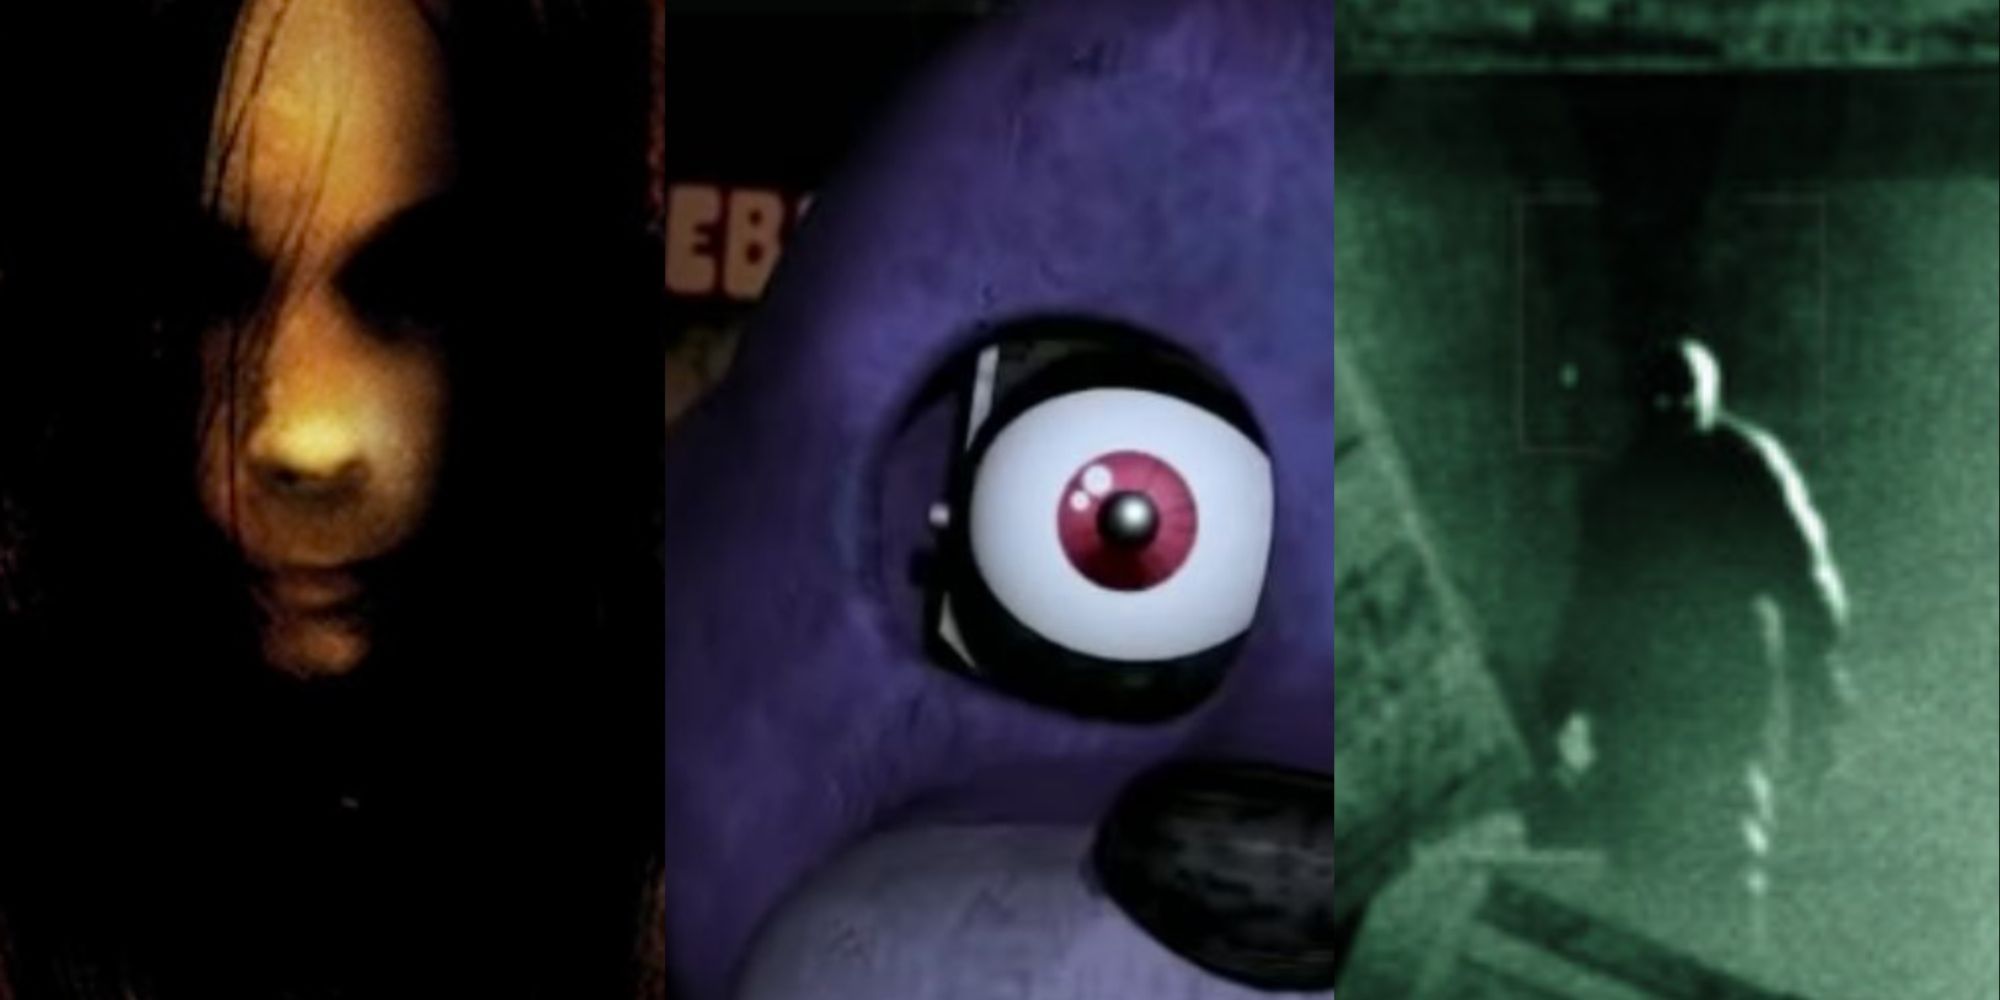 Imagery of the games FEAR, Five Nights At Freddys, and Outlast